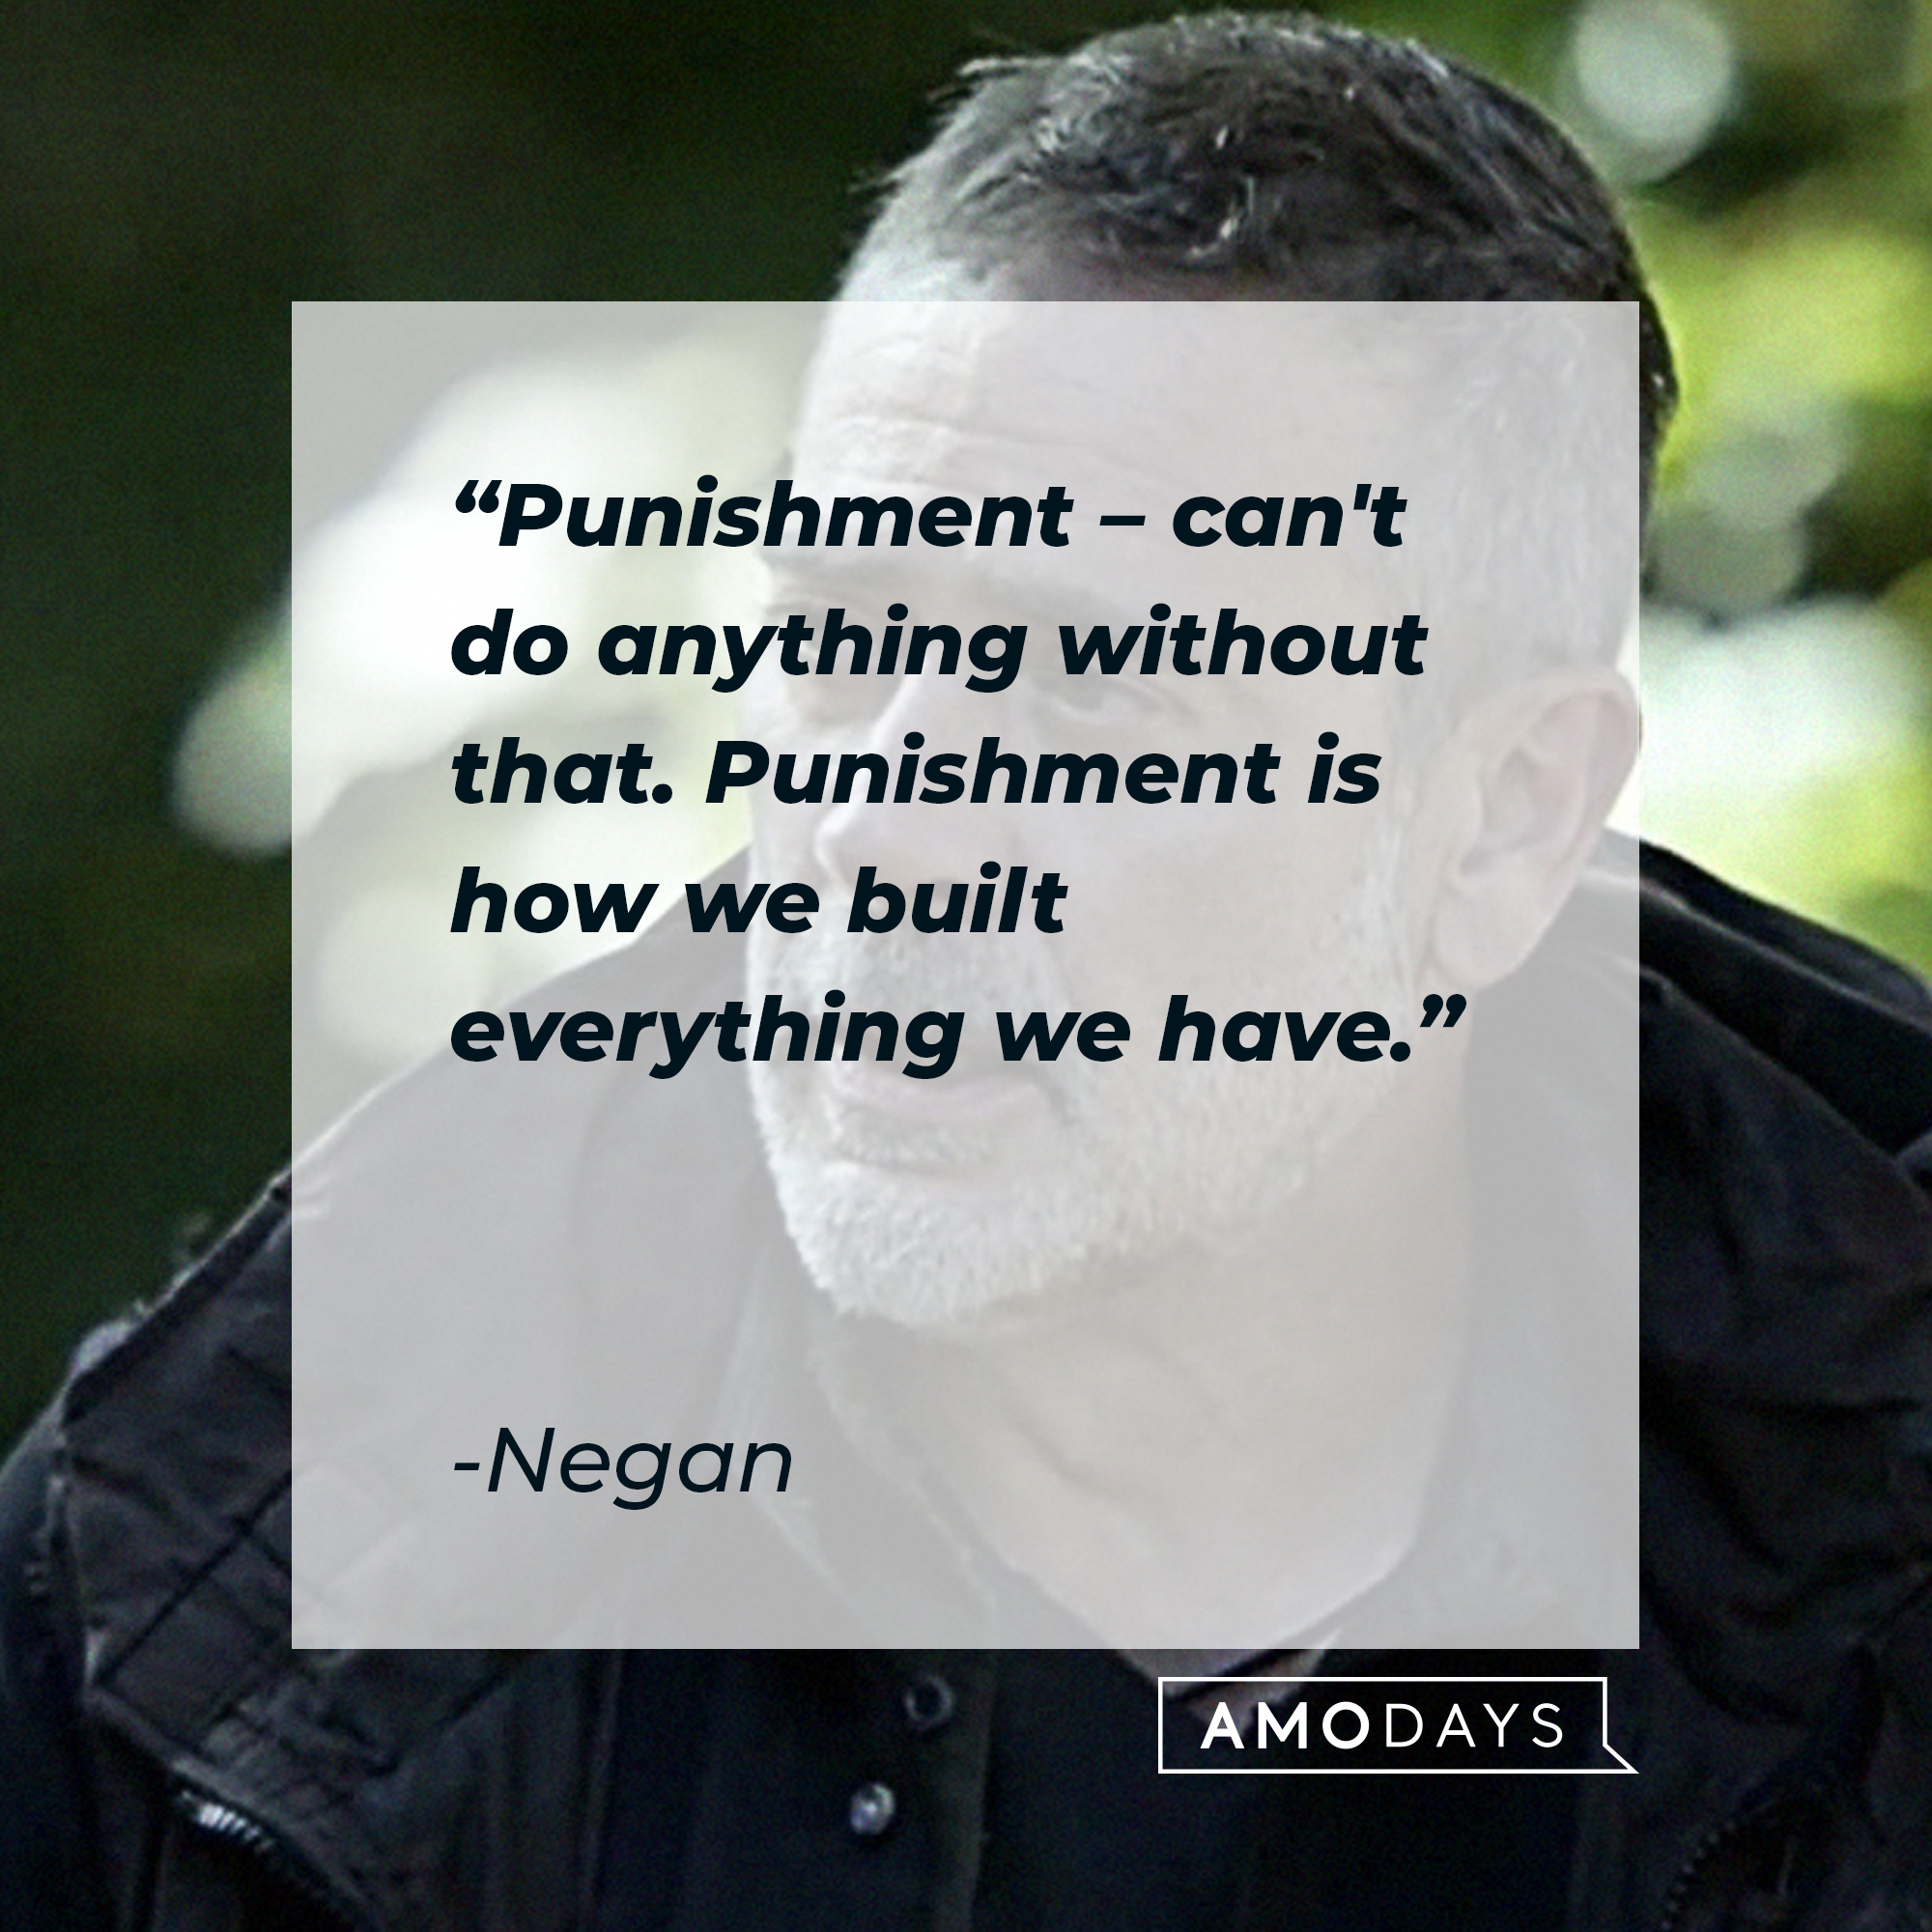 Negan's quote: "Punishment — can't do anything without that. Punishment is how we built everything we have." | Source: Facebook/TheWalkingDeadAMC